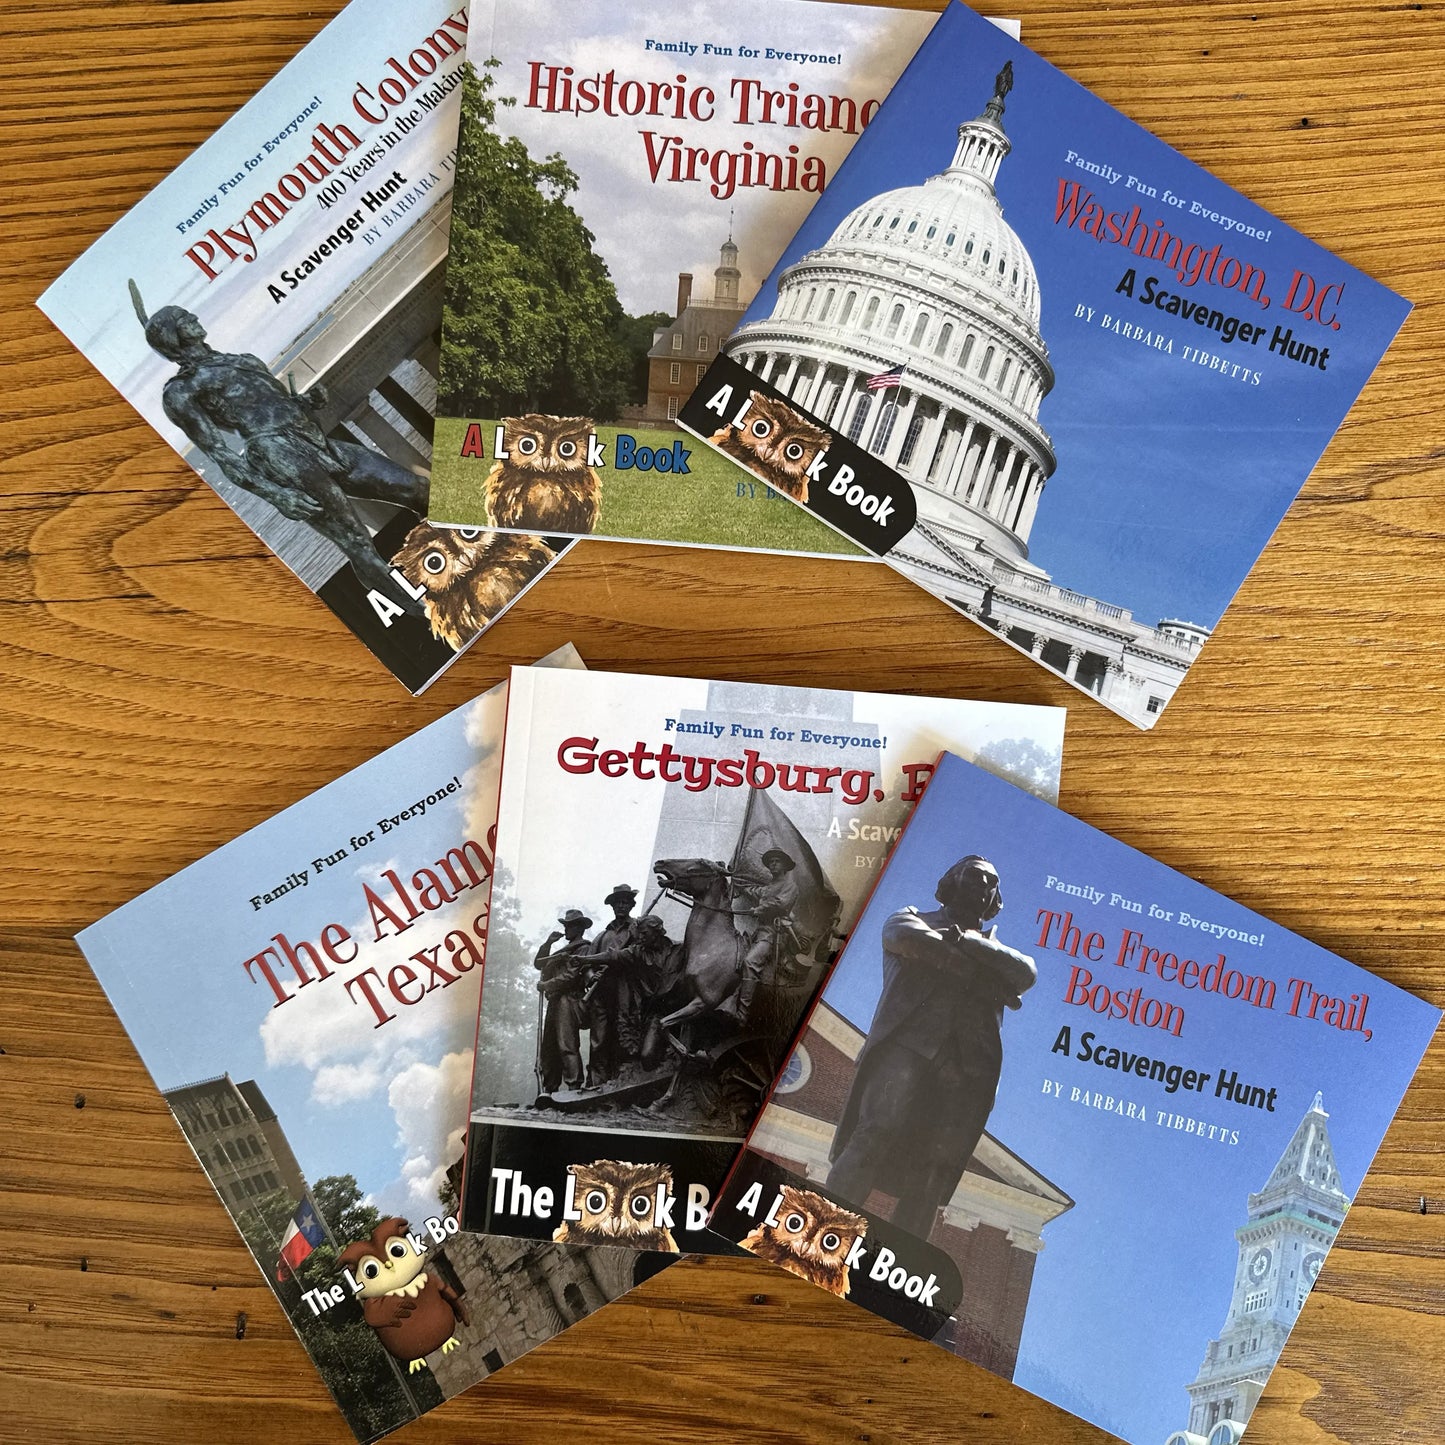 The LOOK Book "Historic Triangle, Virginia: A Scavenger Hunt" by Barbara Tibbetts